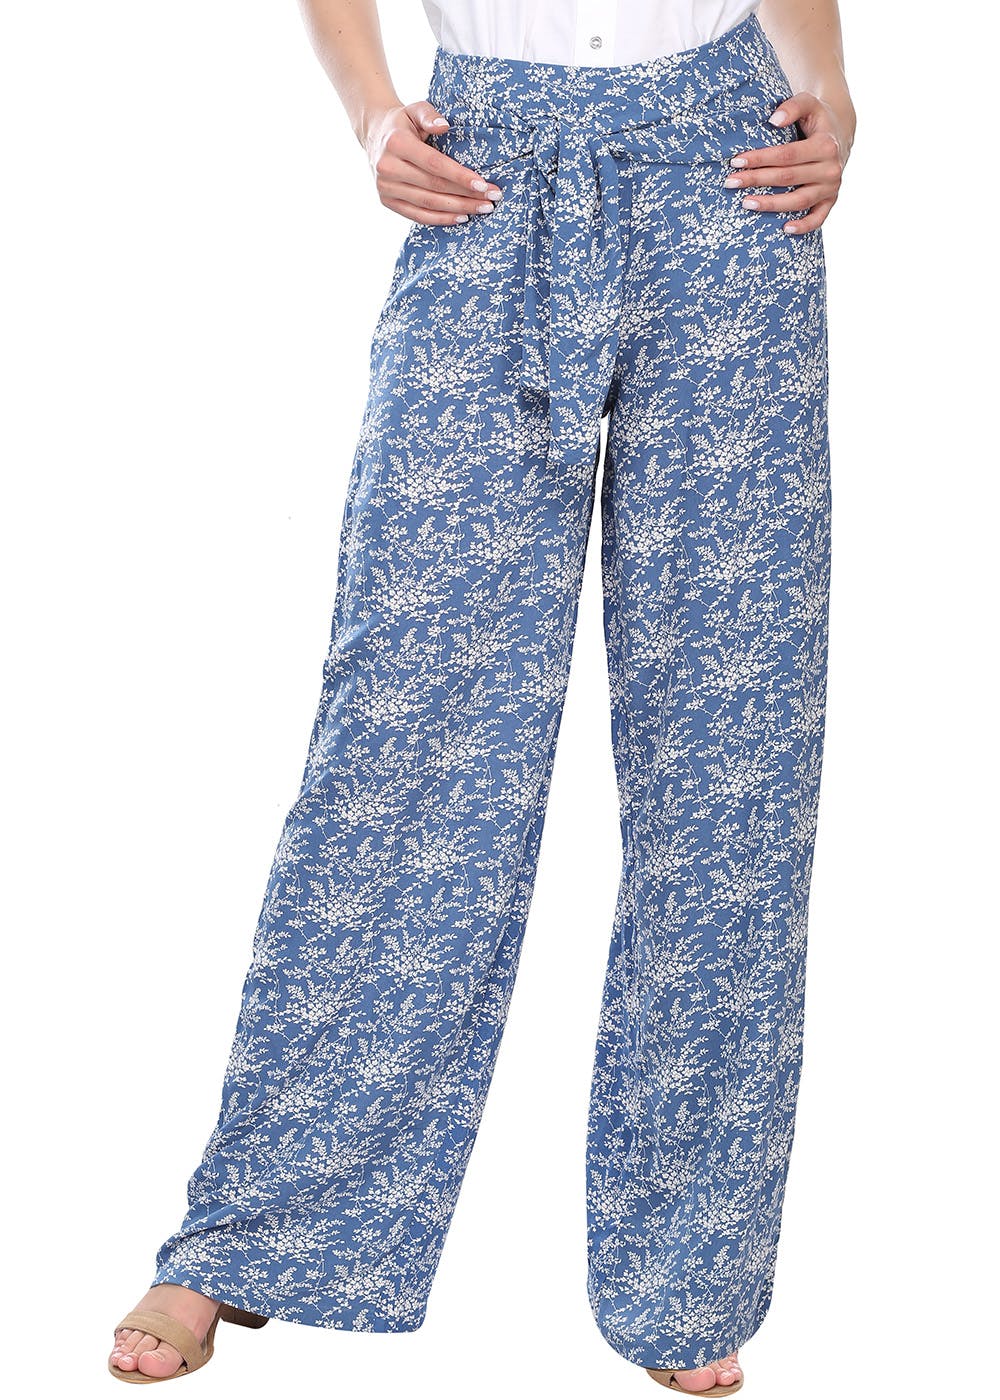 Get Blue  White Floral Printed Wide Legged Pants at  1299  LBB Shop